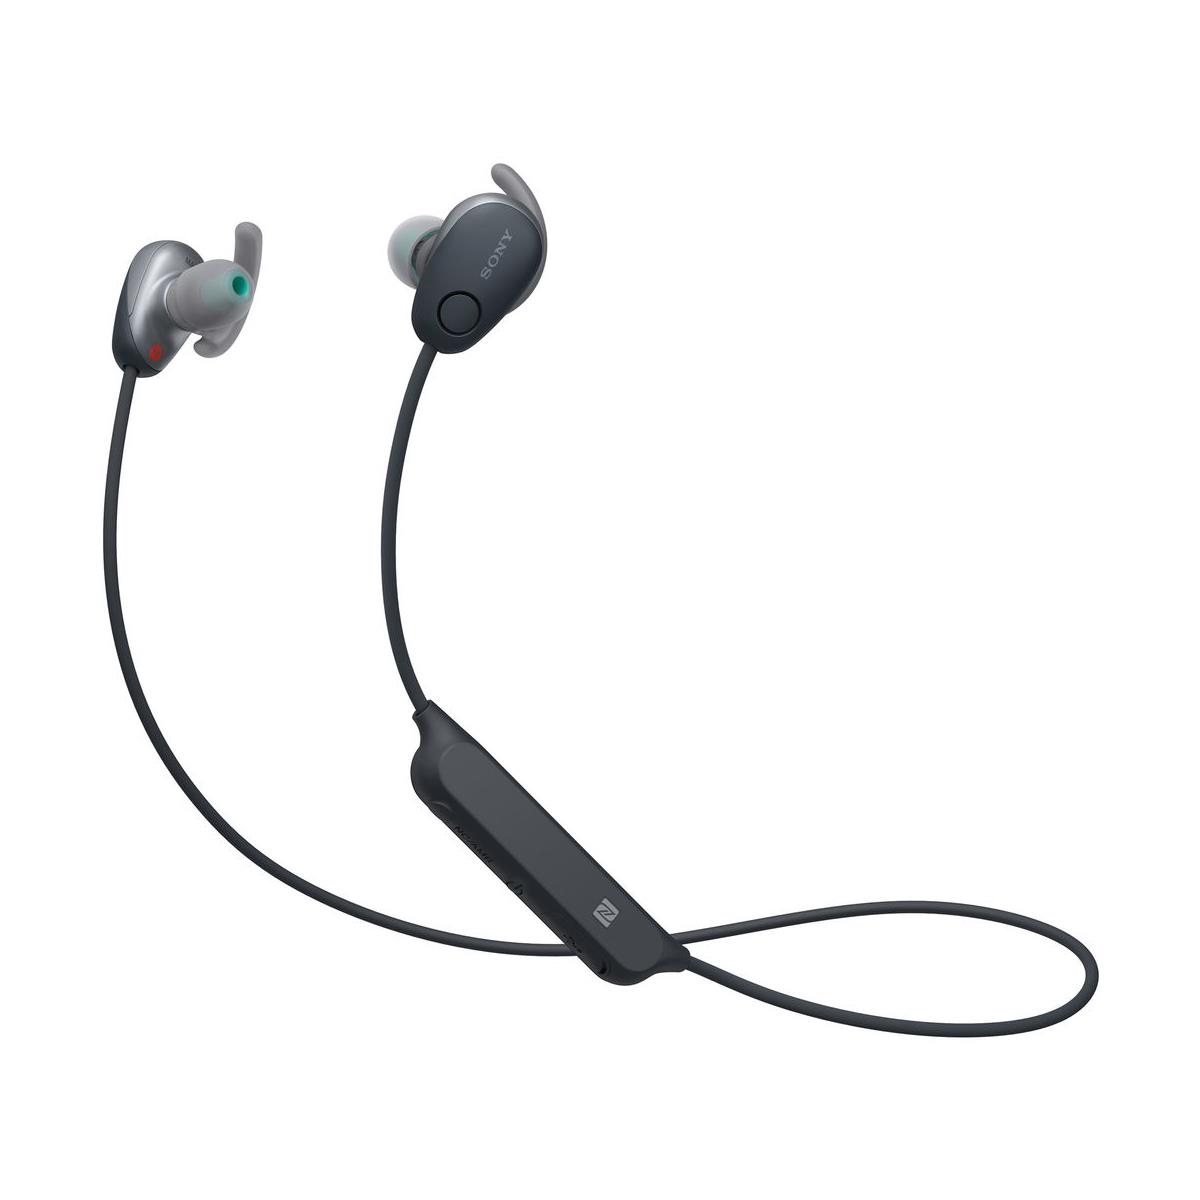 Image of Sony WI-SP600N Wireless Noise-Canceling In-Ear Sports Headphones with Mic